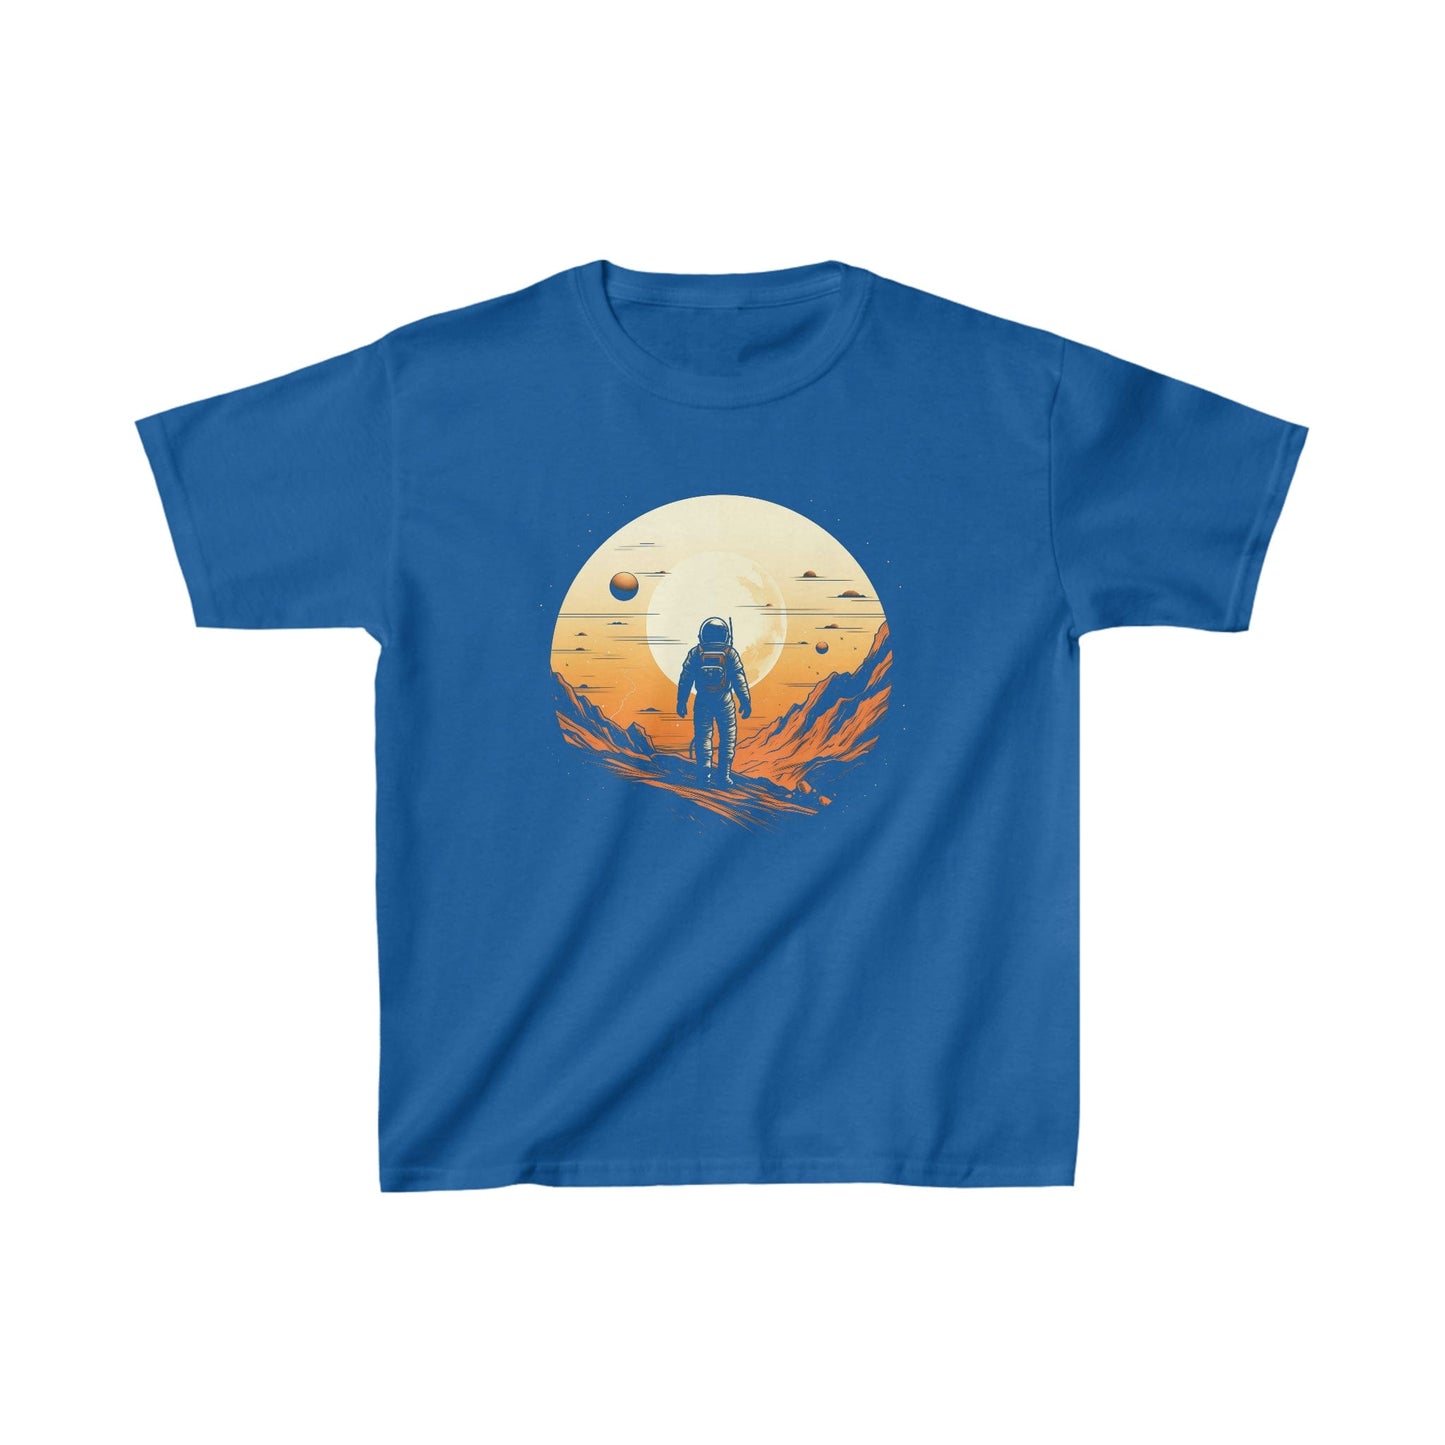 Kids clothes XS / Royal Youth Lunar Explorer: Astronaut on the Moon T-Shirt